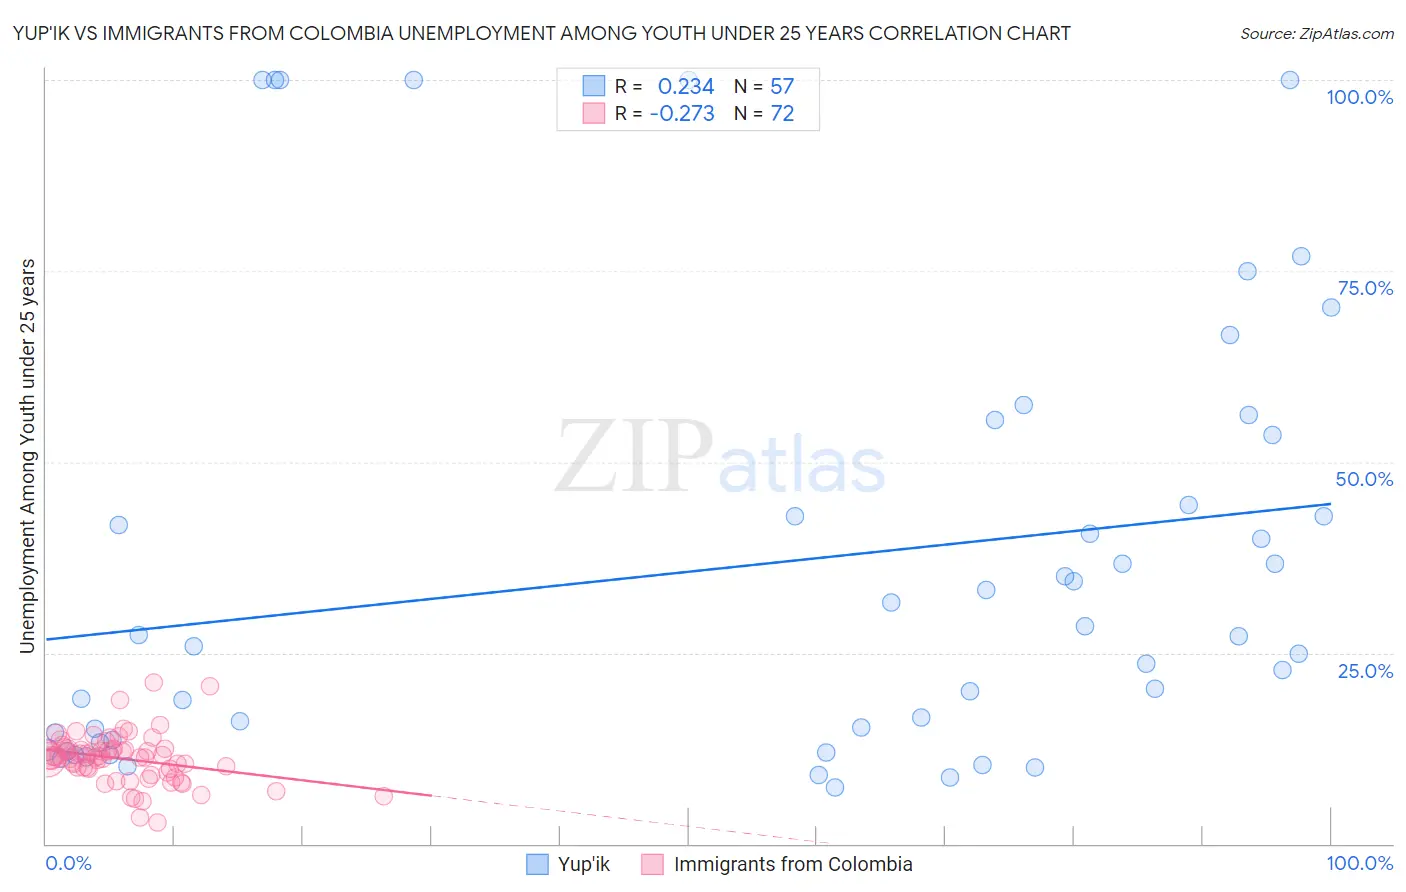 Yup'ik vs Immigrants from Colombia Unemployment Among Youth under 25 years